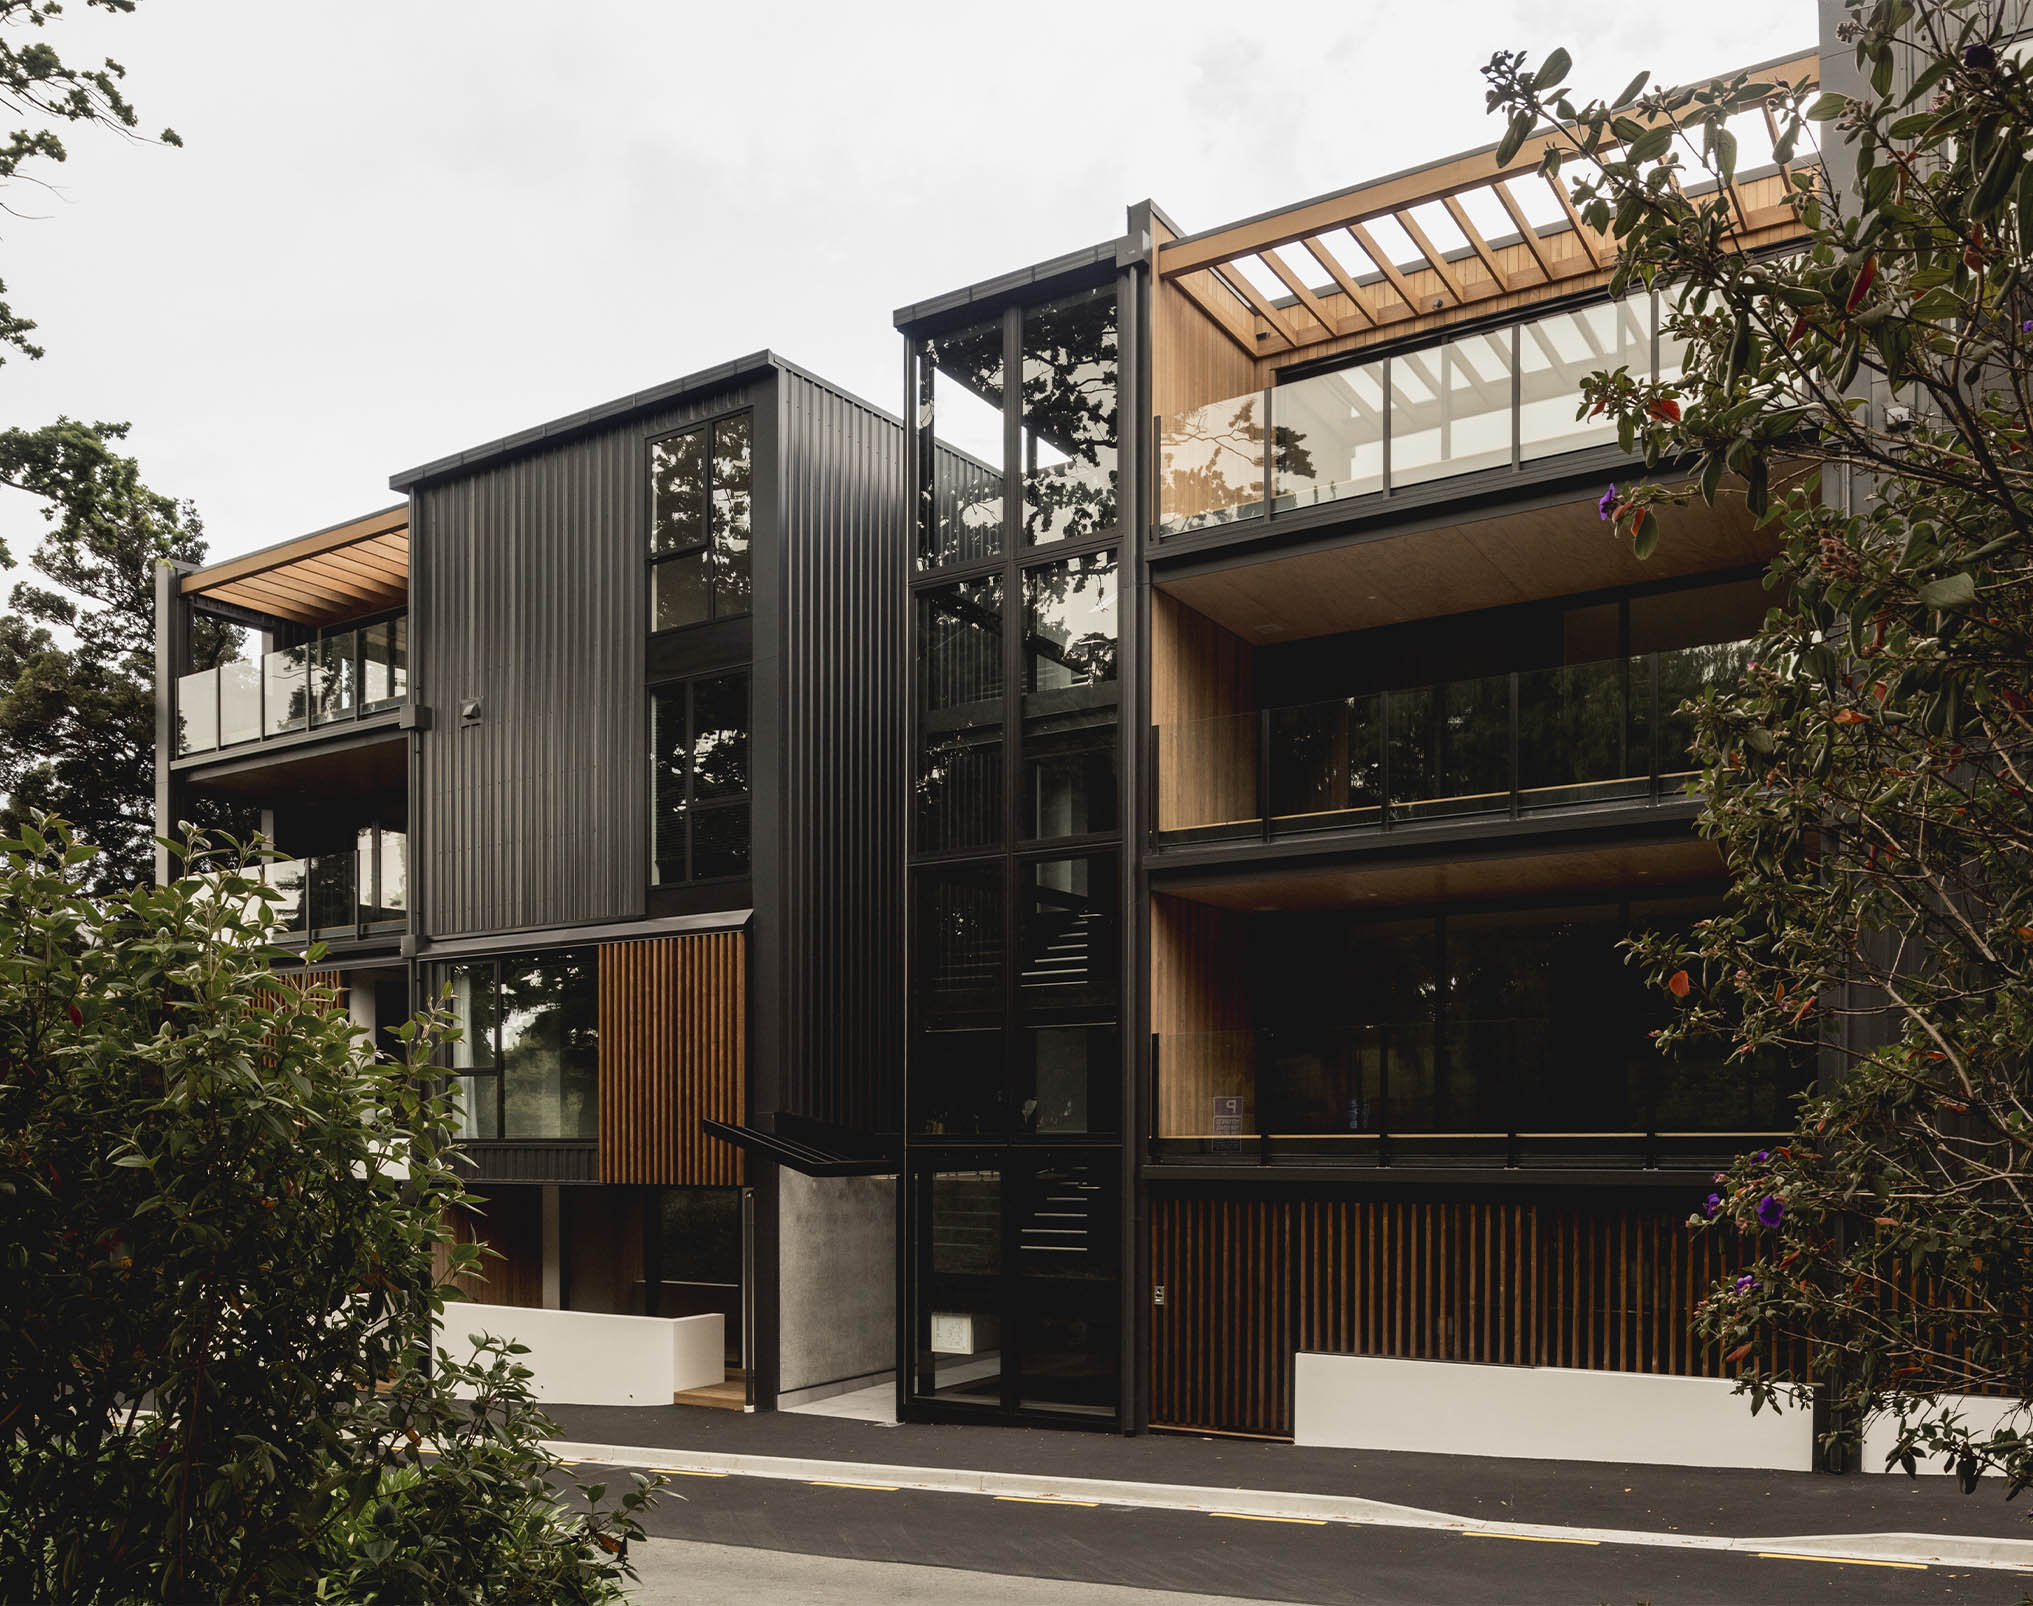 Betts Luxuary Apartments - Vulcan Screening in Teak - Abodo Wood - feature image